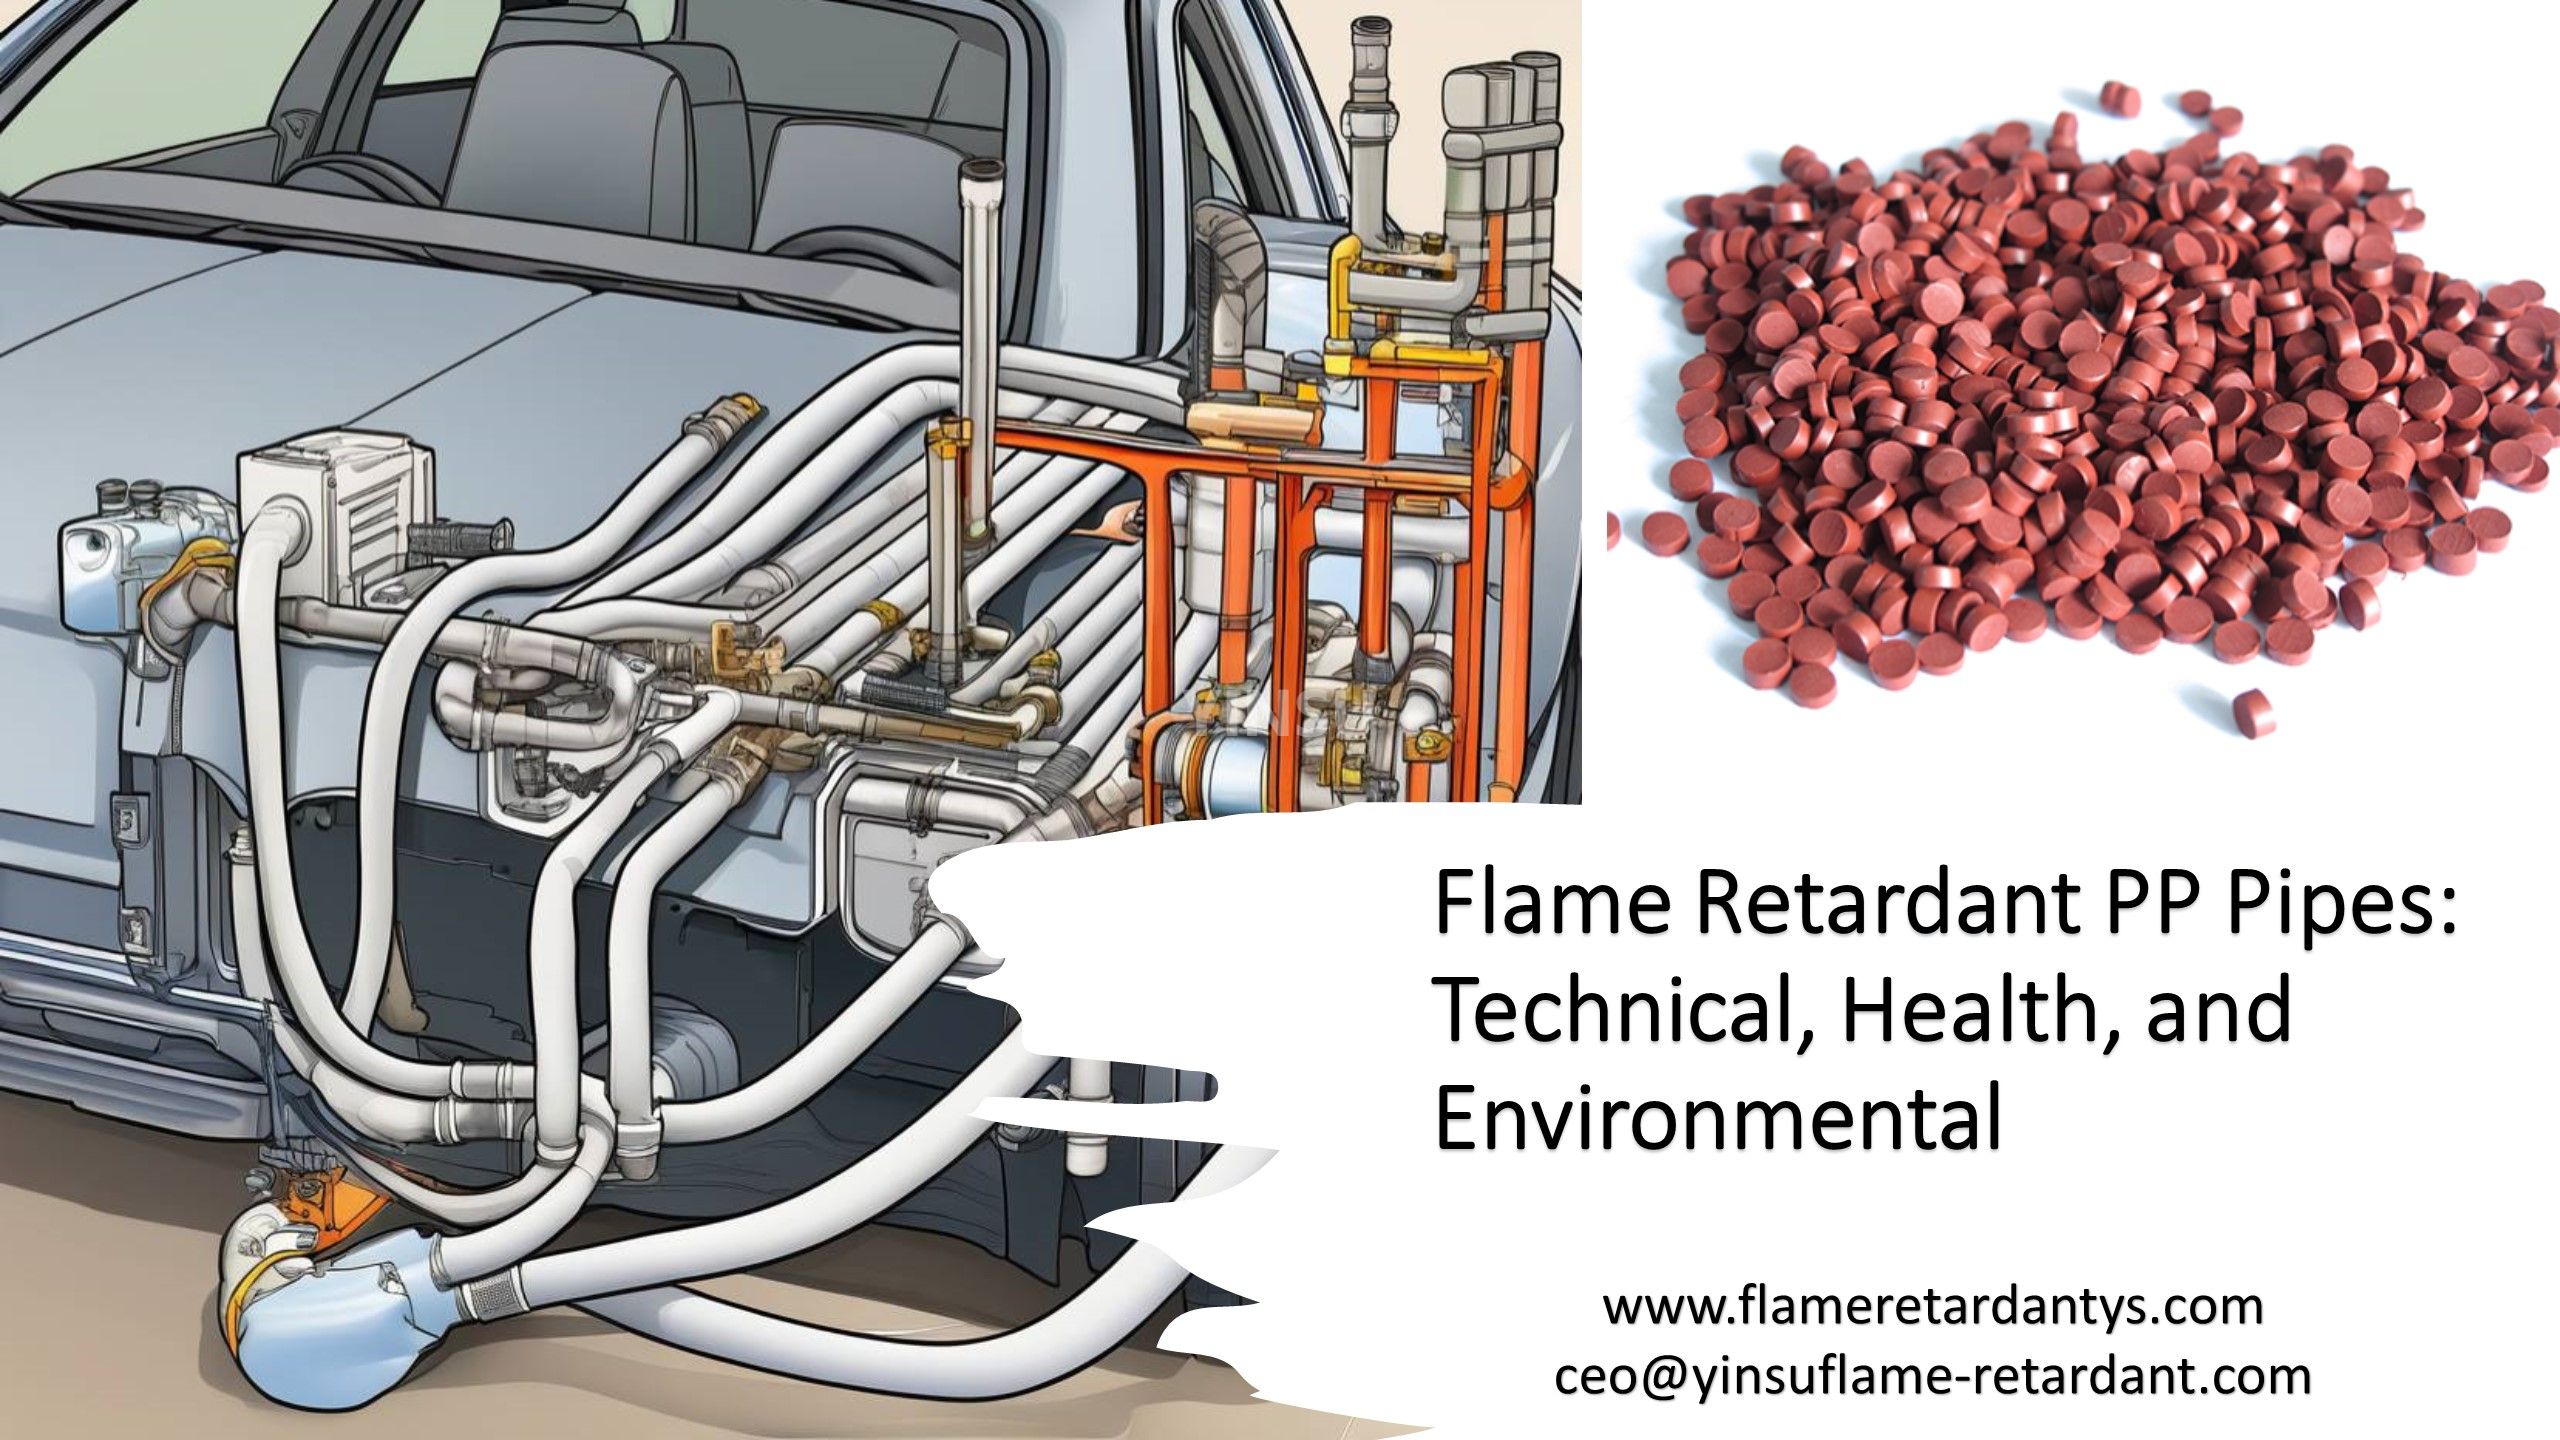 Flame Retardant PP Pipes: Technical, Health, and Environmental Considerations